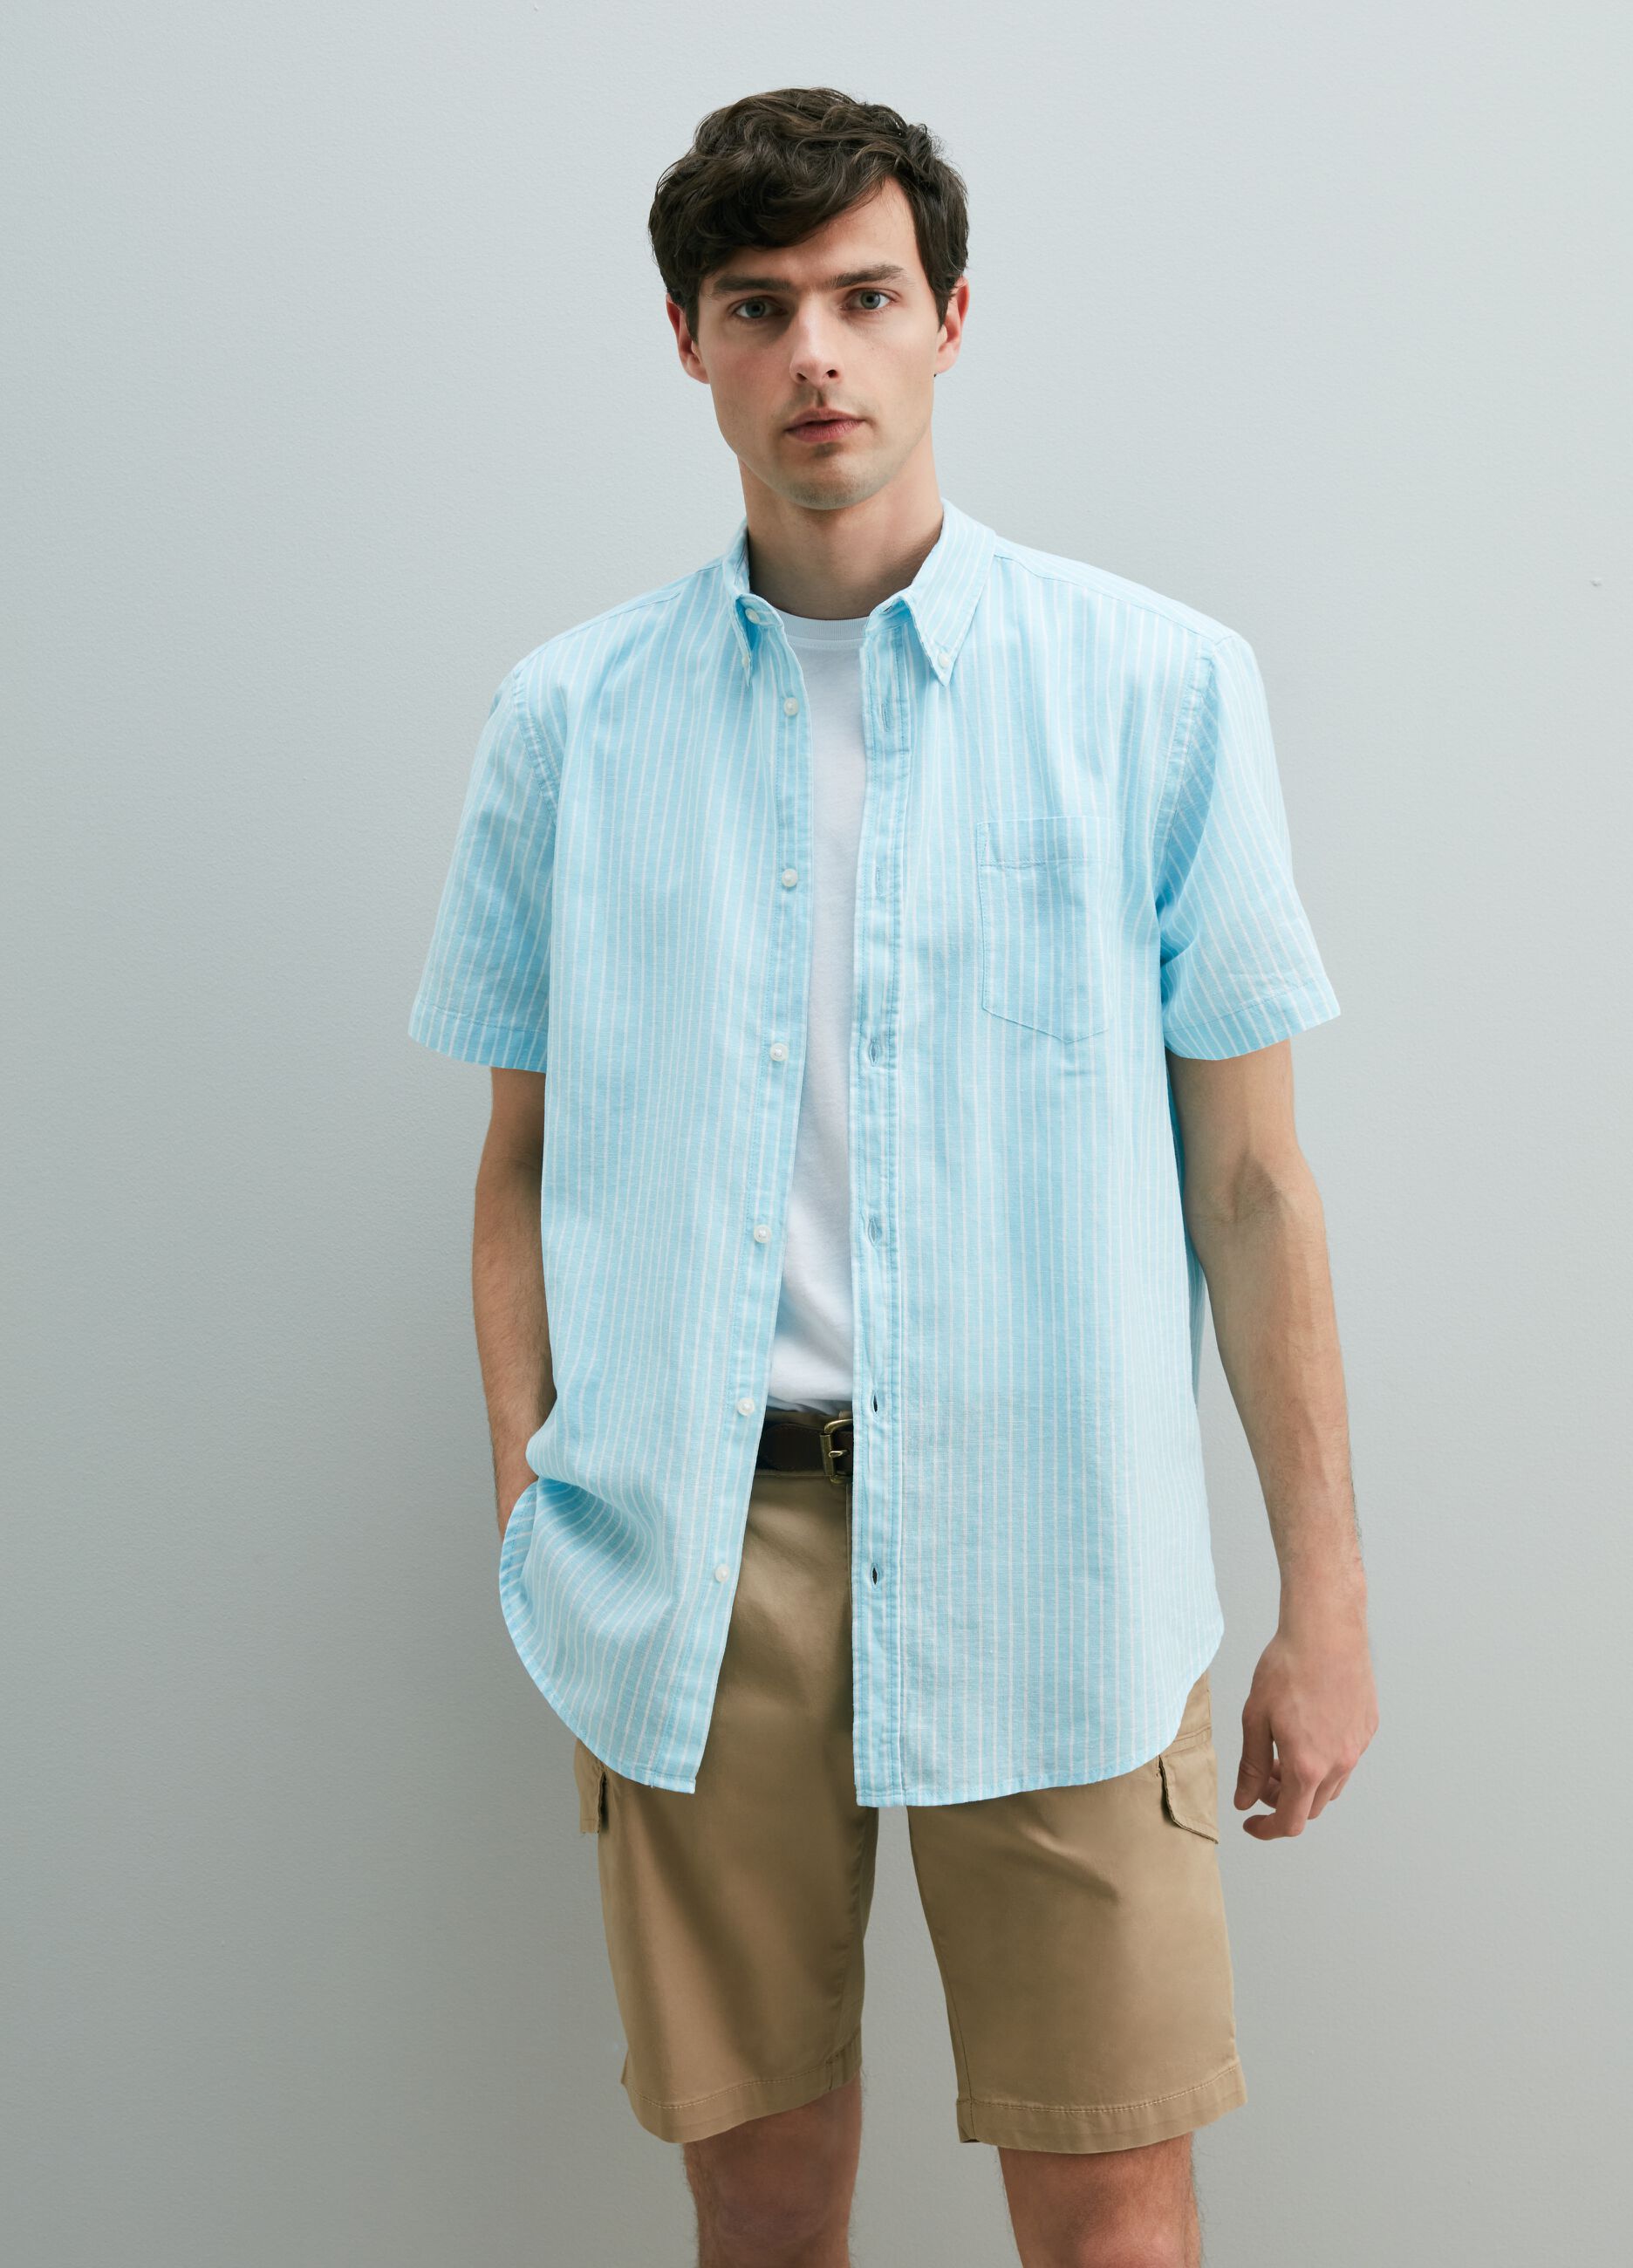 Short-sleeved shirt with button-down collar